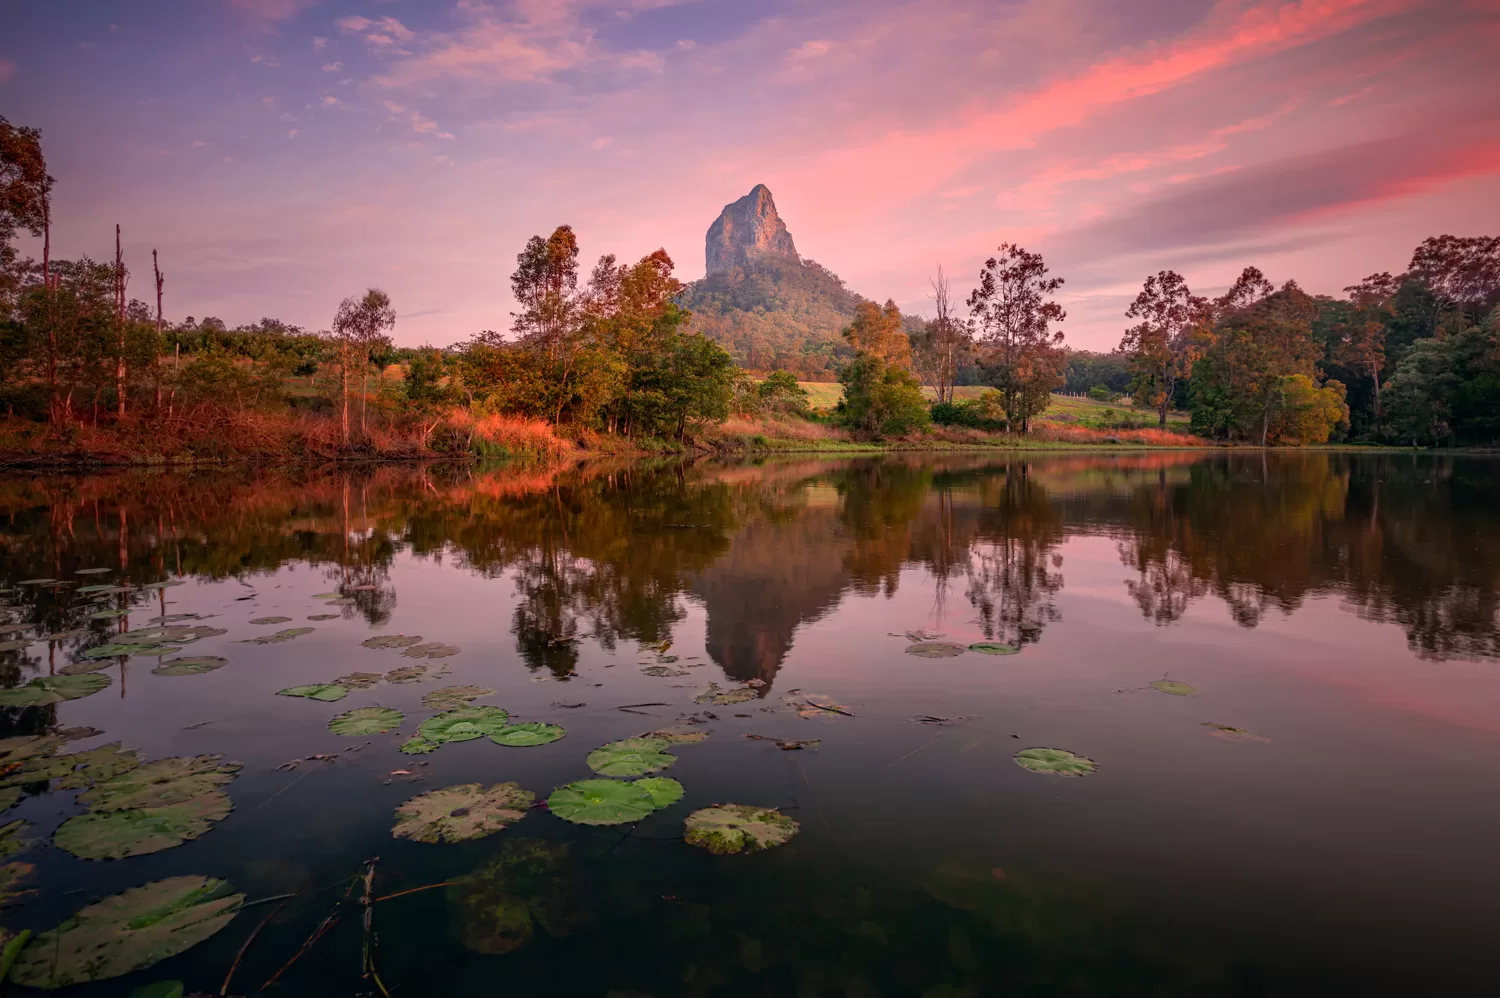 Mount Coonowrin, also known as Crookneck, on the Sunshine Coast